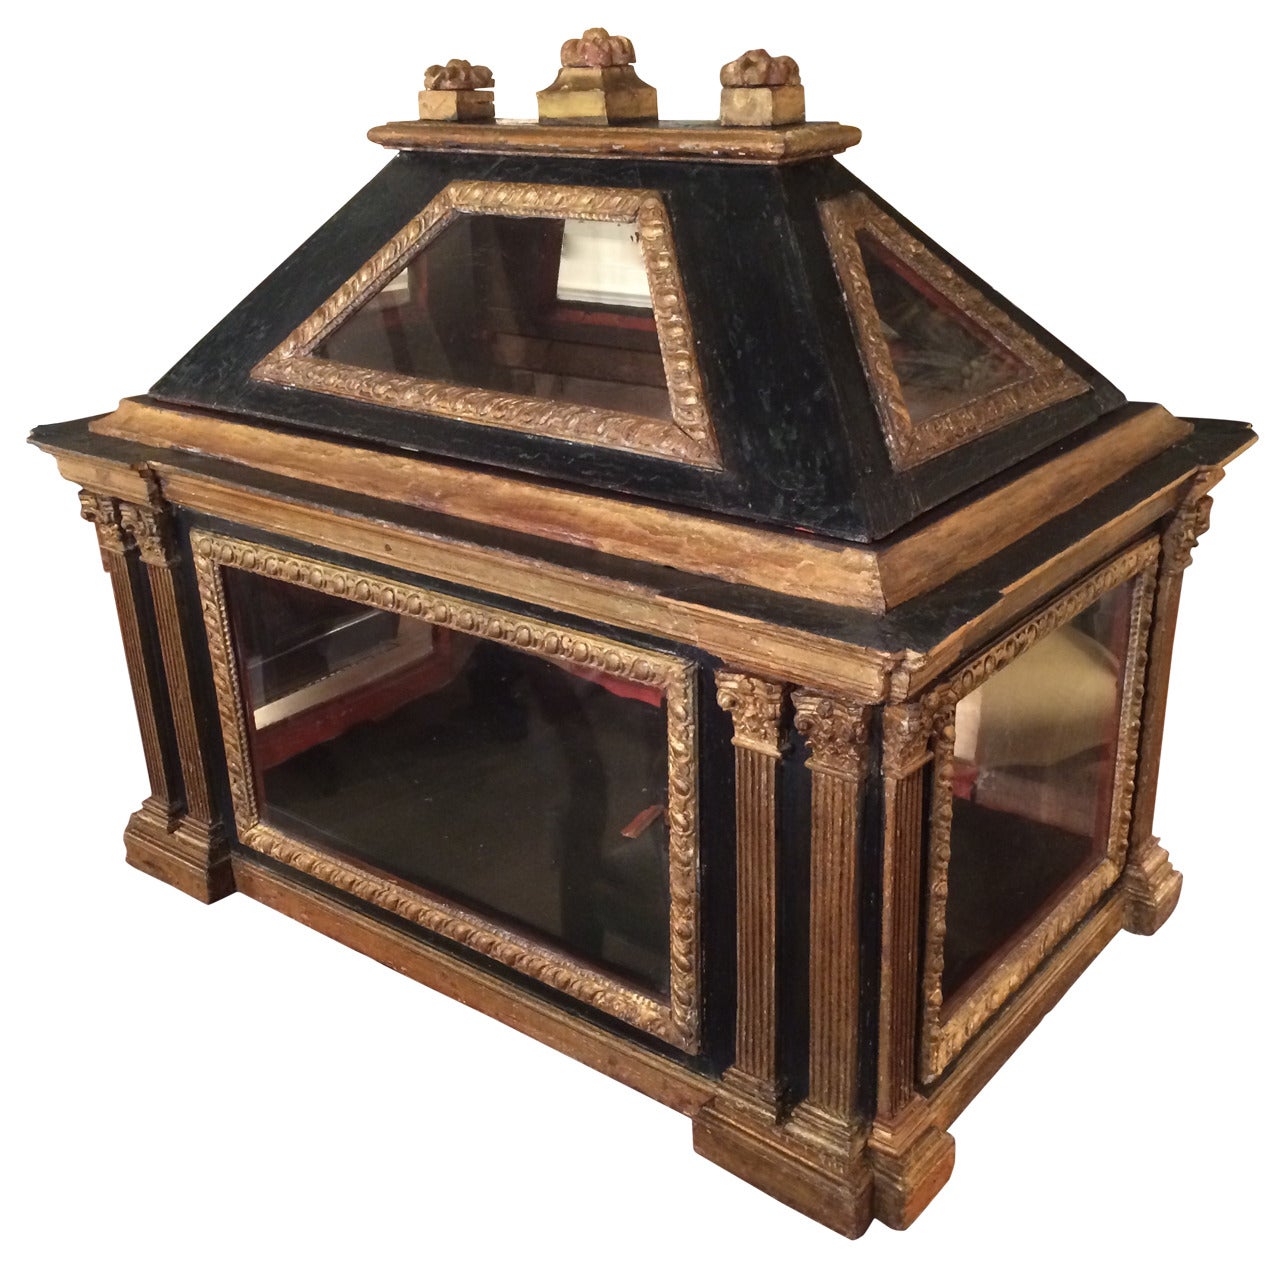 Italian Neoclassical Painted and Gilt Wood Architectural Reliquary